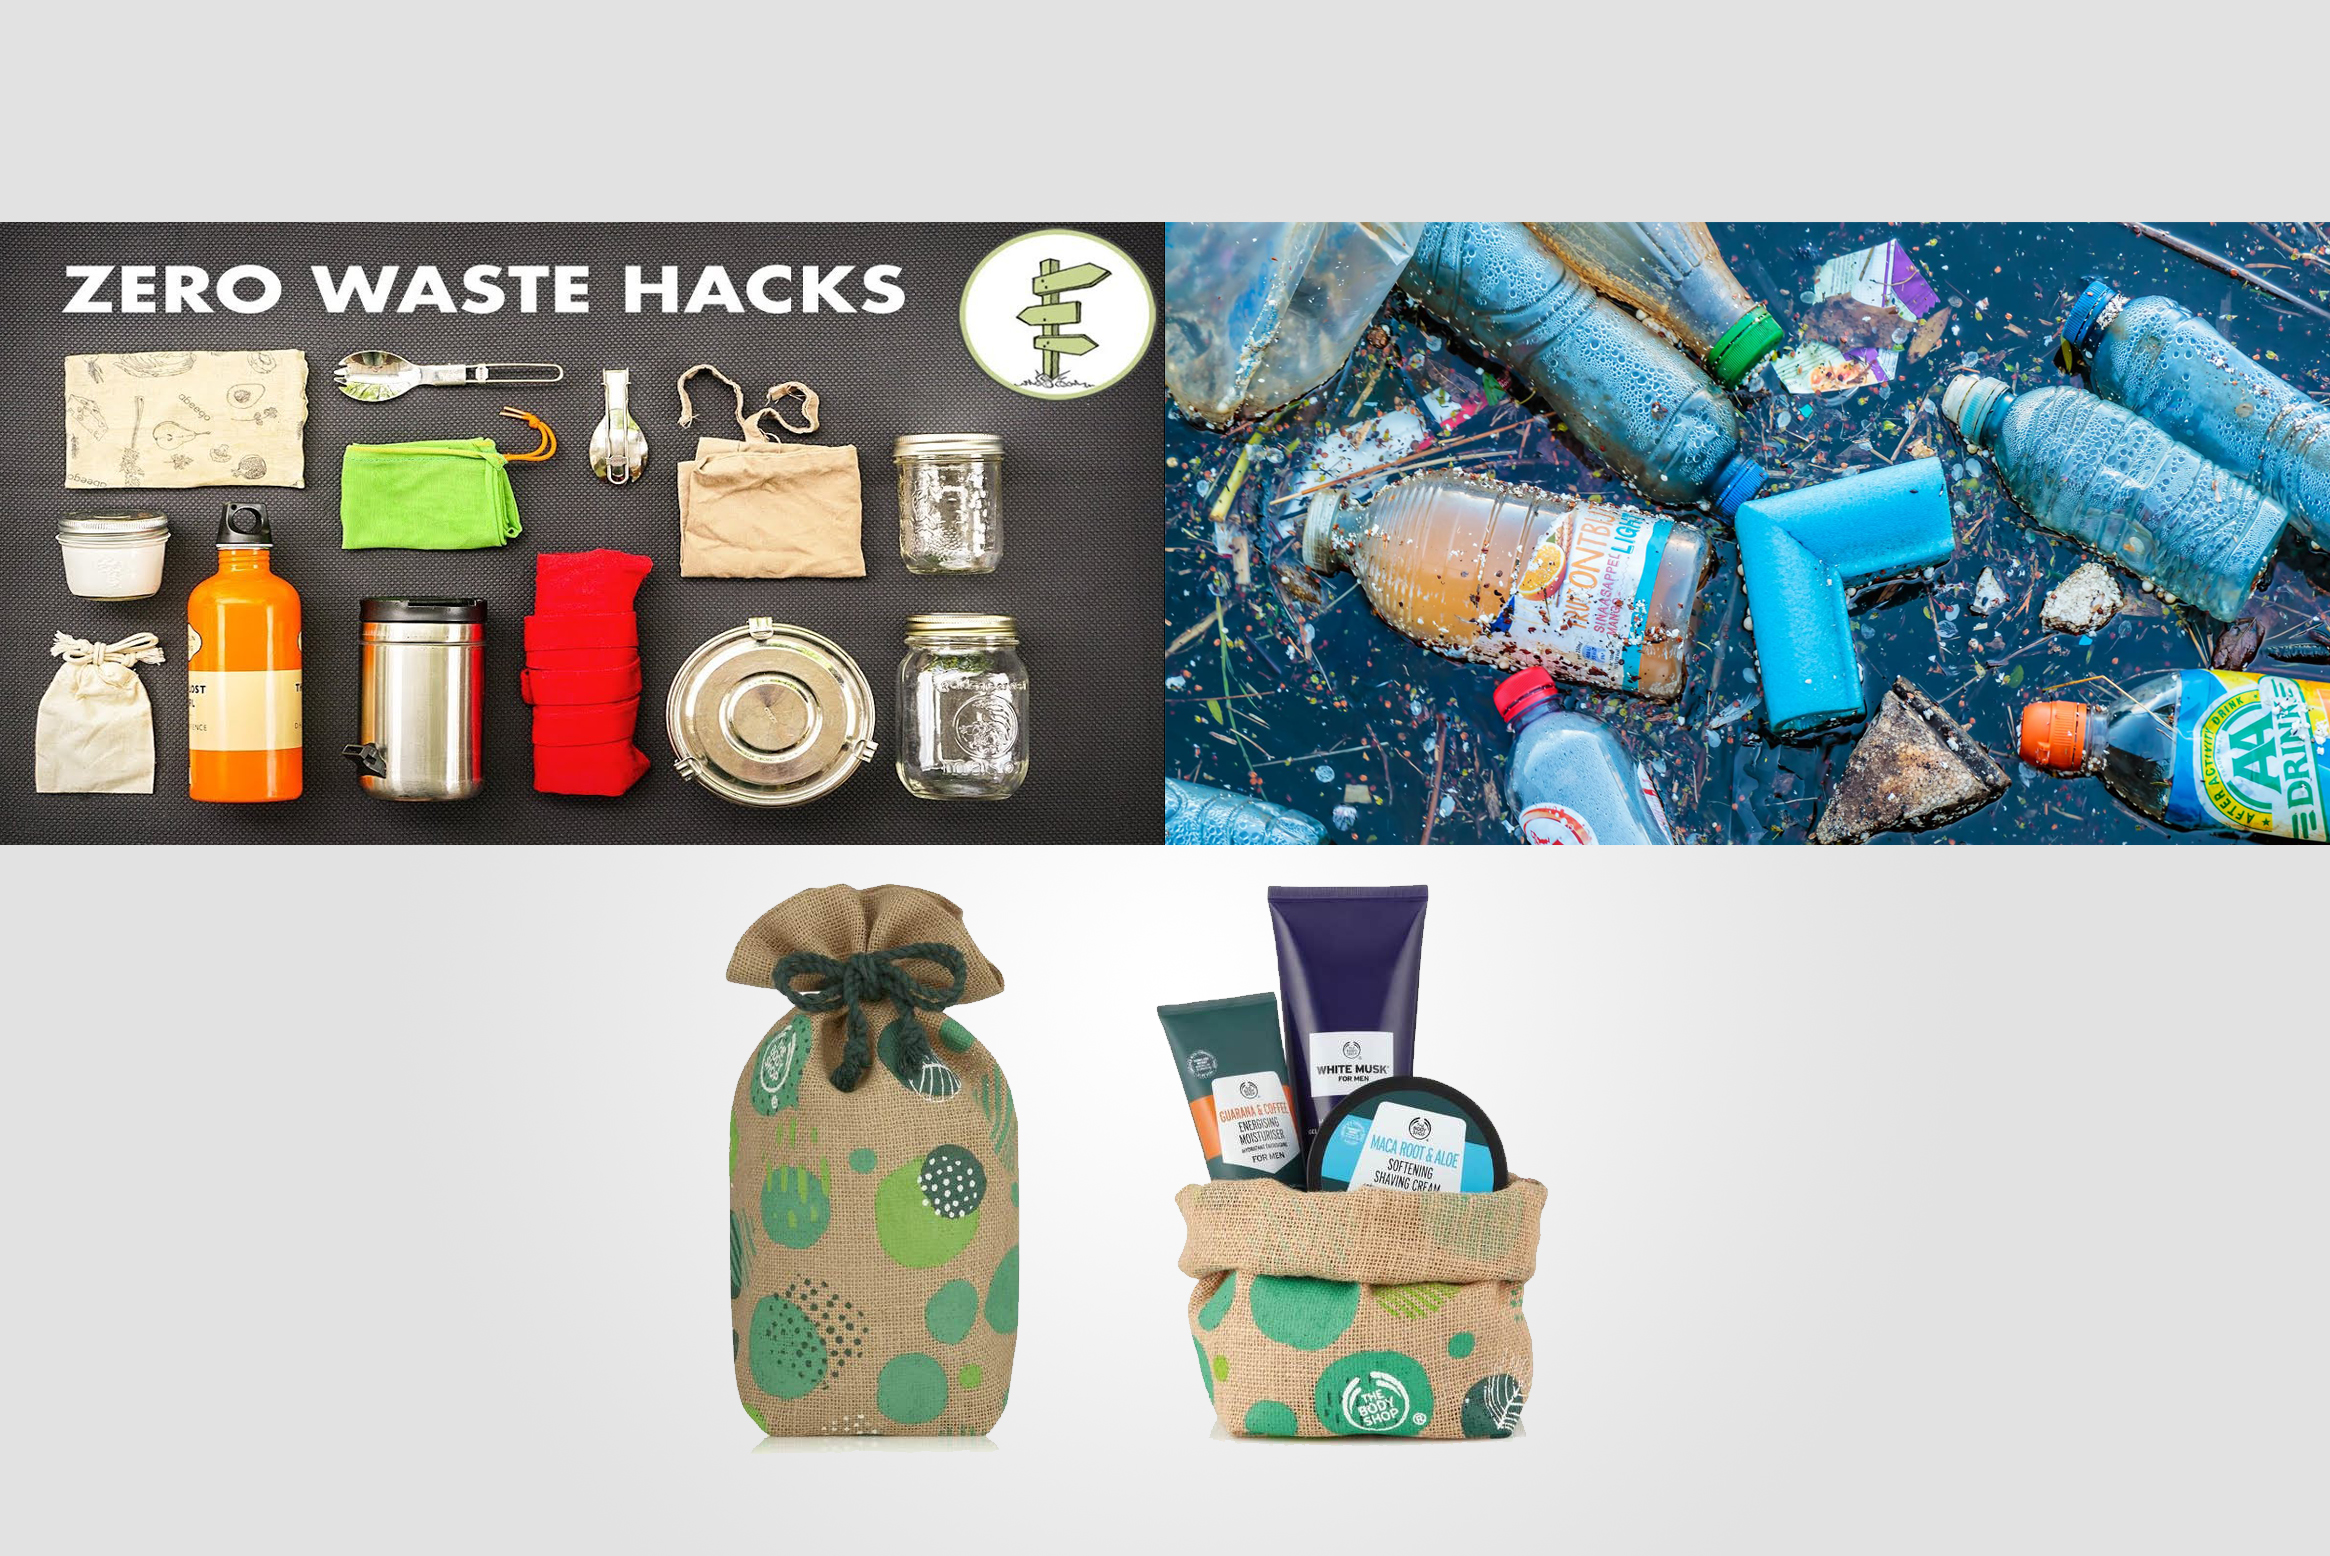 14 Simple Ways To Live More Sustainably And Reduce Plastic Waste